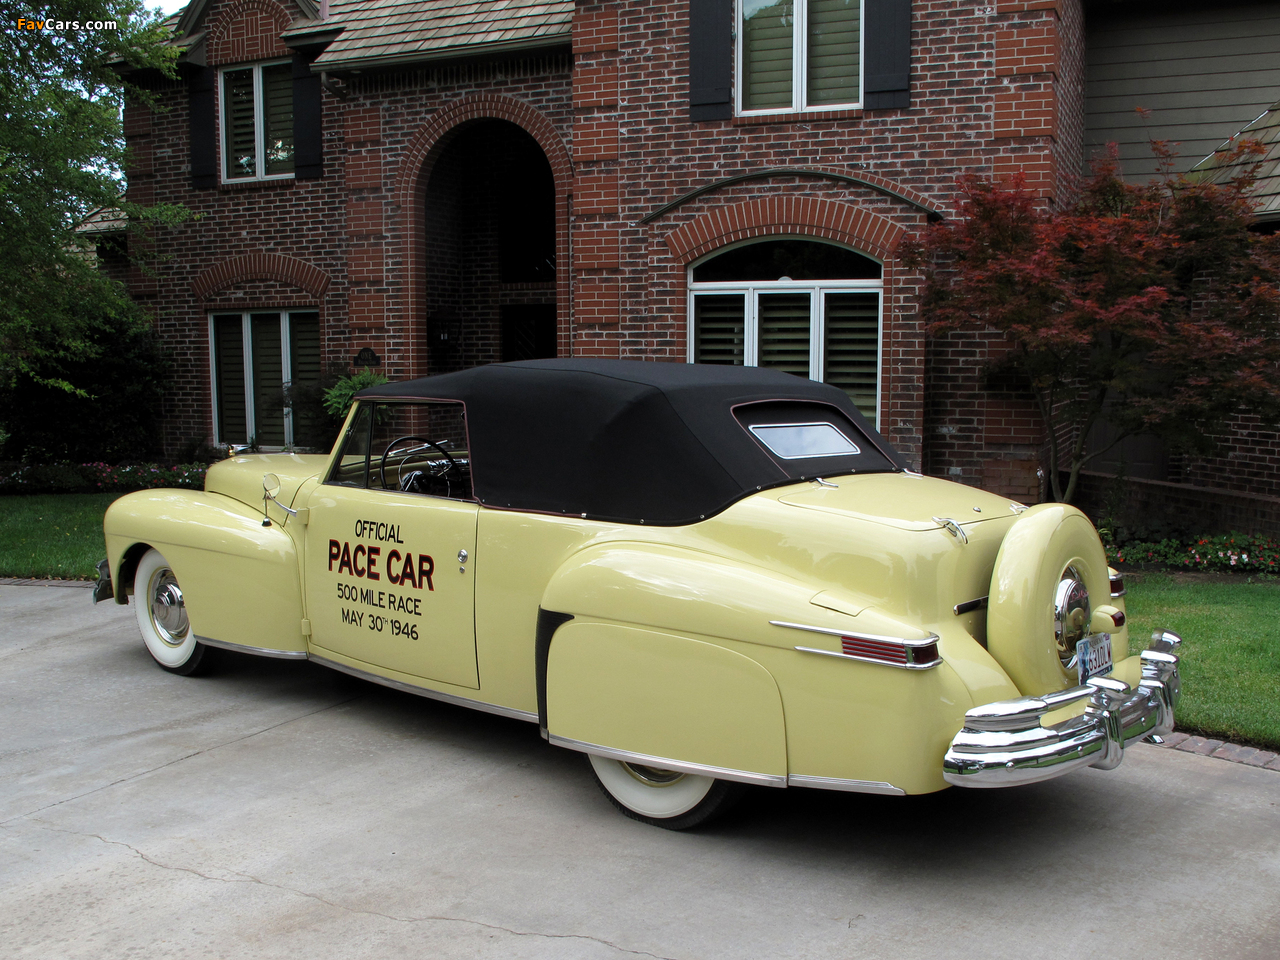 Lincoln Continental Cabriolet Indy 500 Pace Car 1946 photos (1280 x 960)